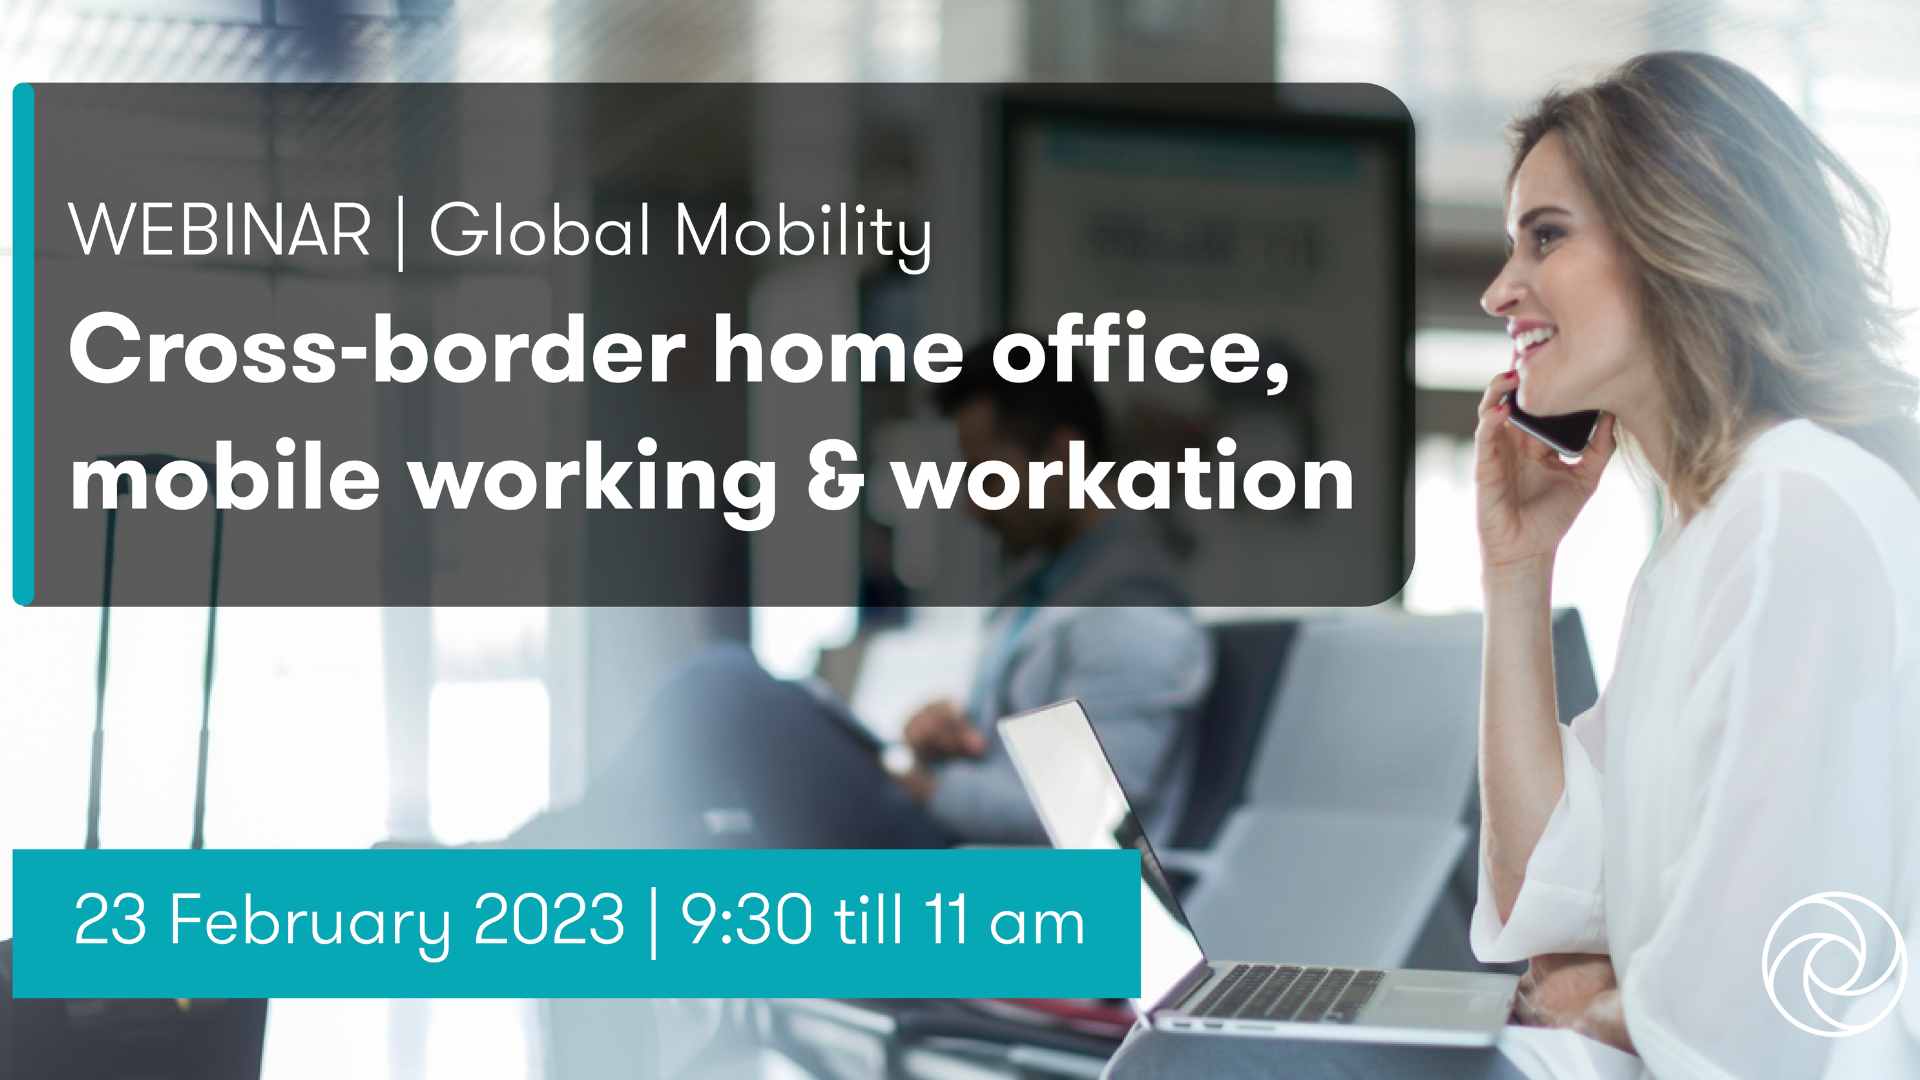 WEBINAR | Cross-border home office, mobile working, workation